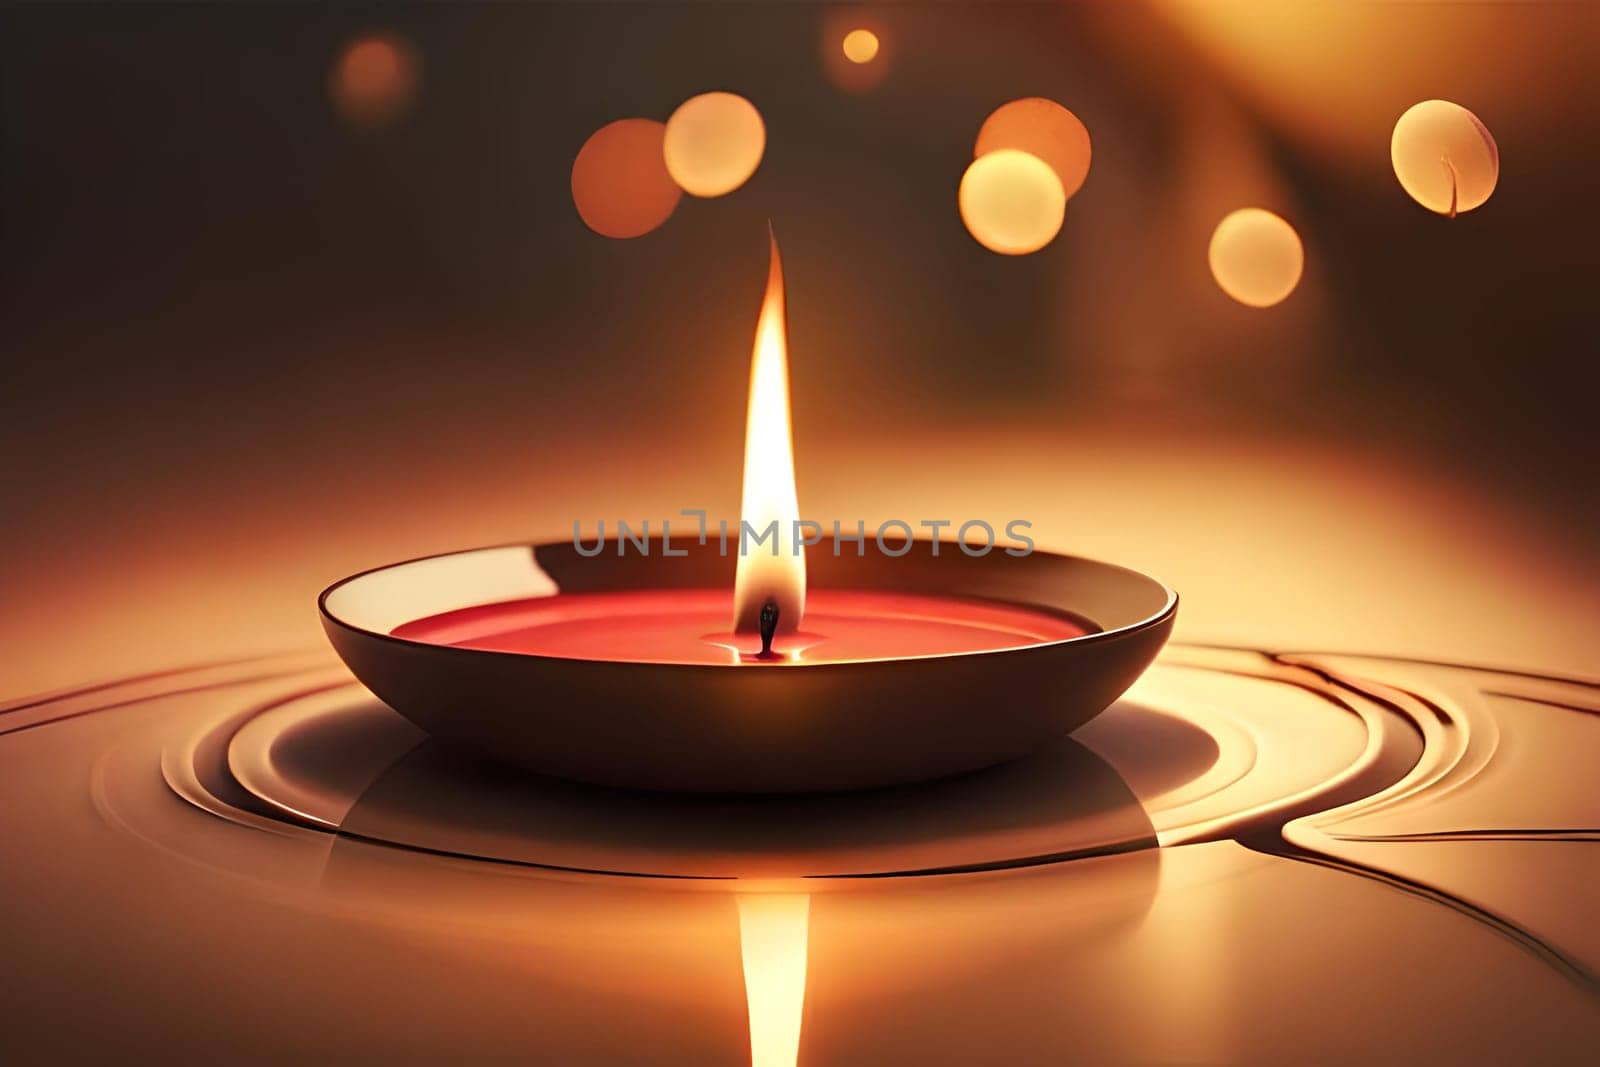 3D rendering indian lamp for diwali celebration on soft background ethereal. Colorful particle effects in the background. Gold filigree on a indian lamp. AI-generated Digital Art